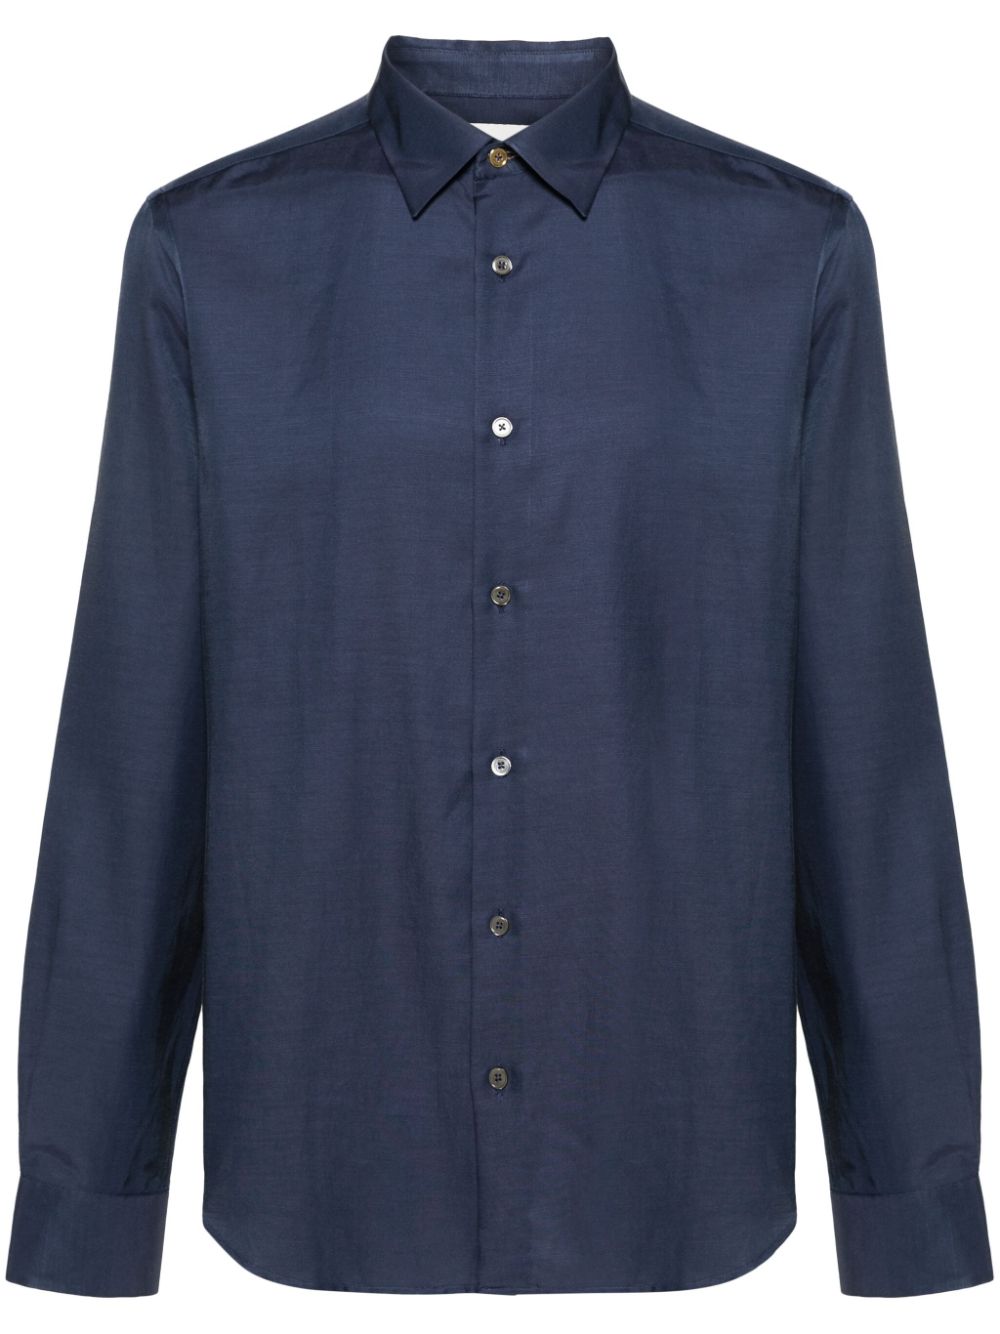 Paul Smith long-sleeves buttoned shirt - Blue von Paul Smith